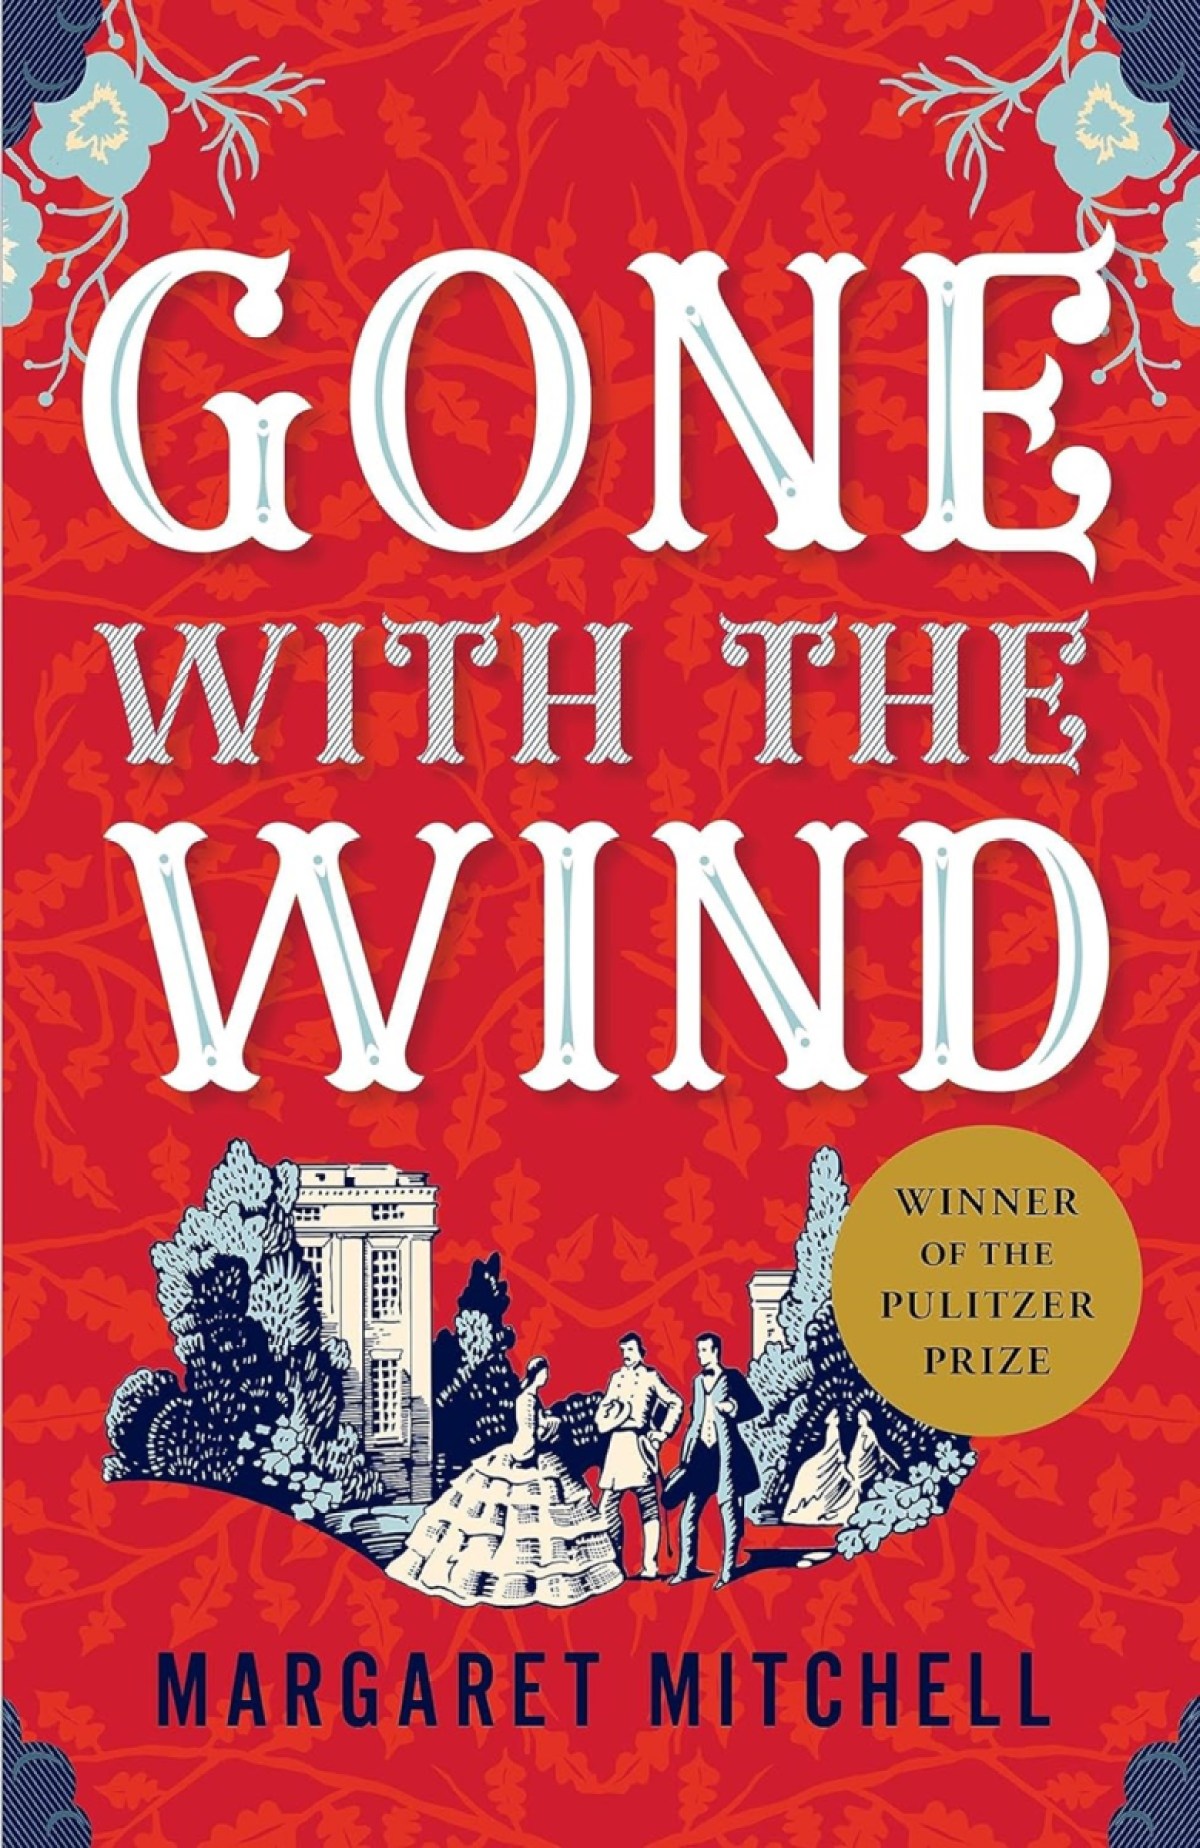 Gone With the Wind original 1936 book cover